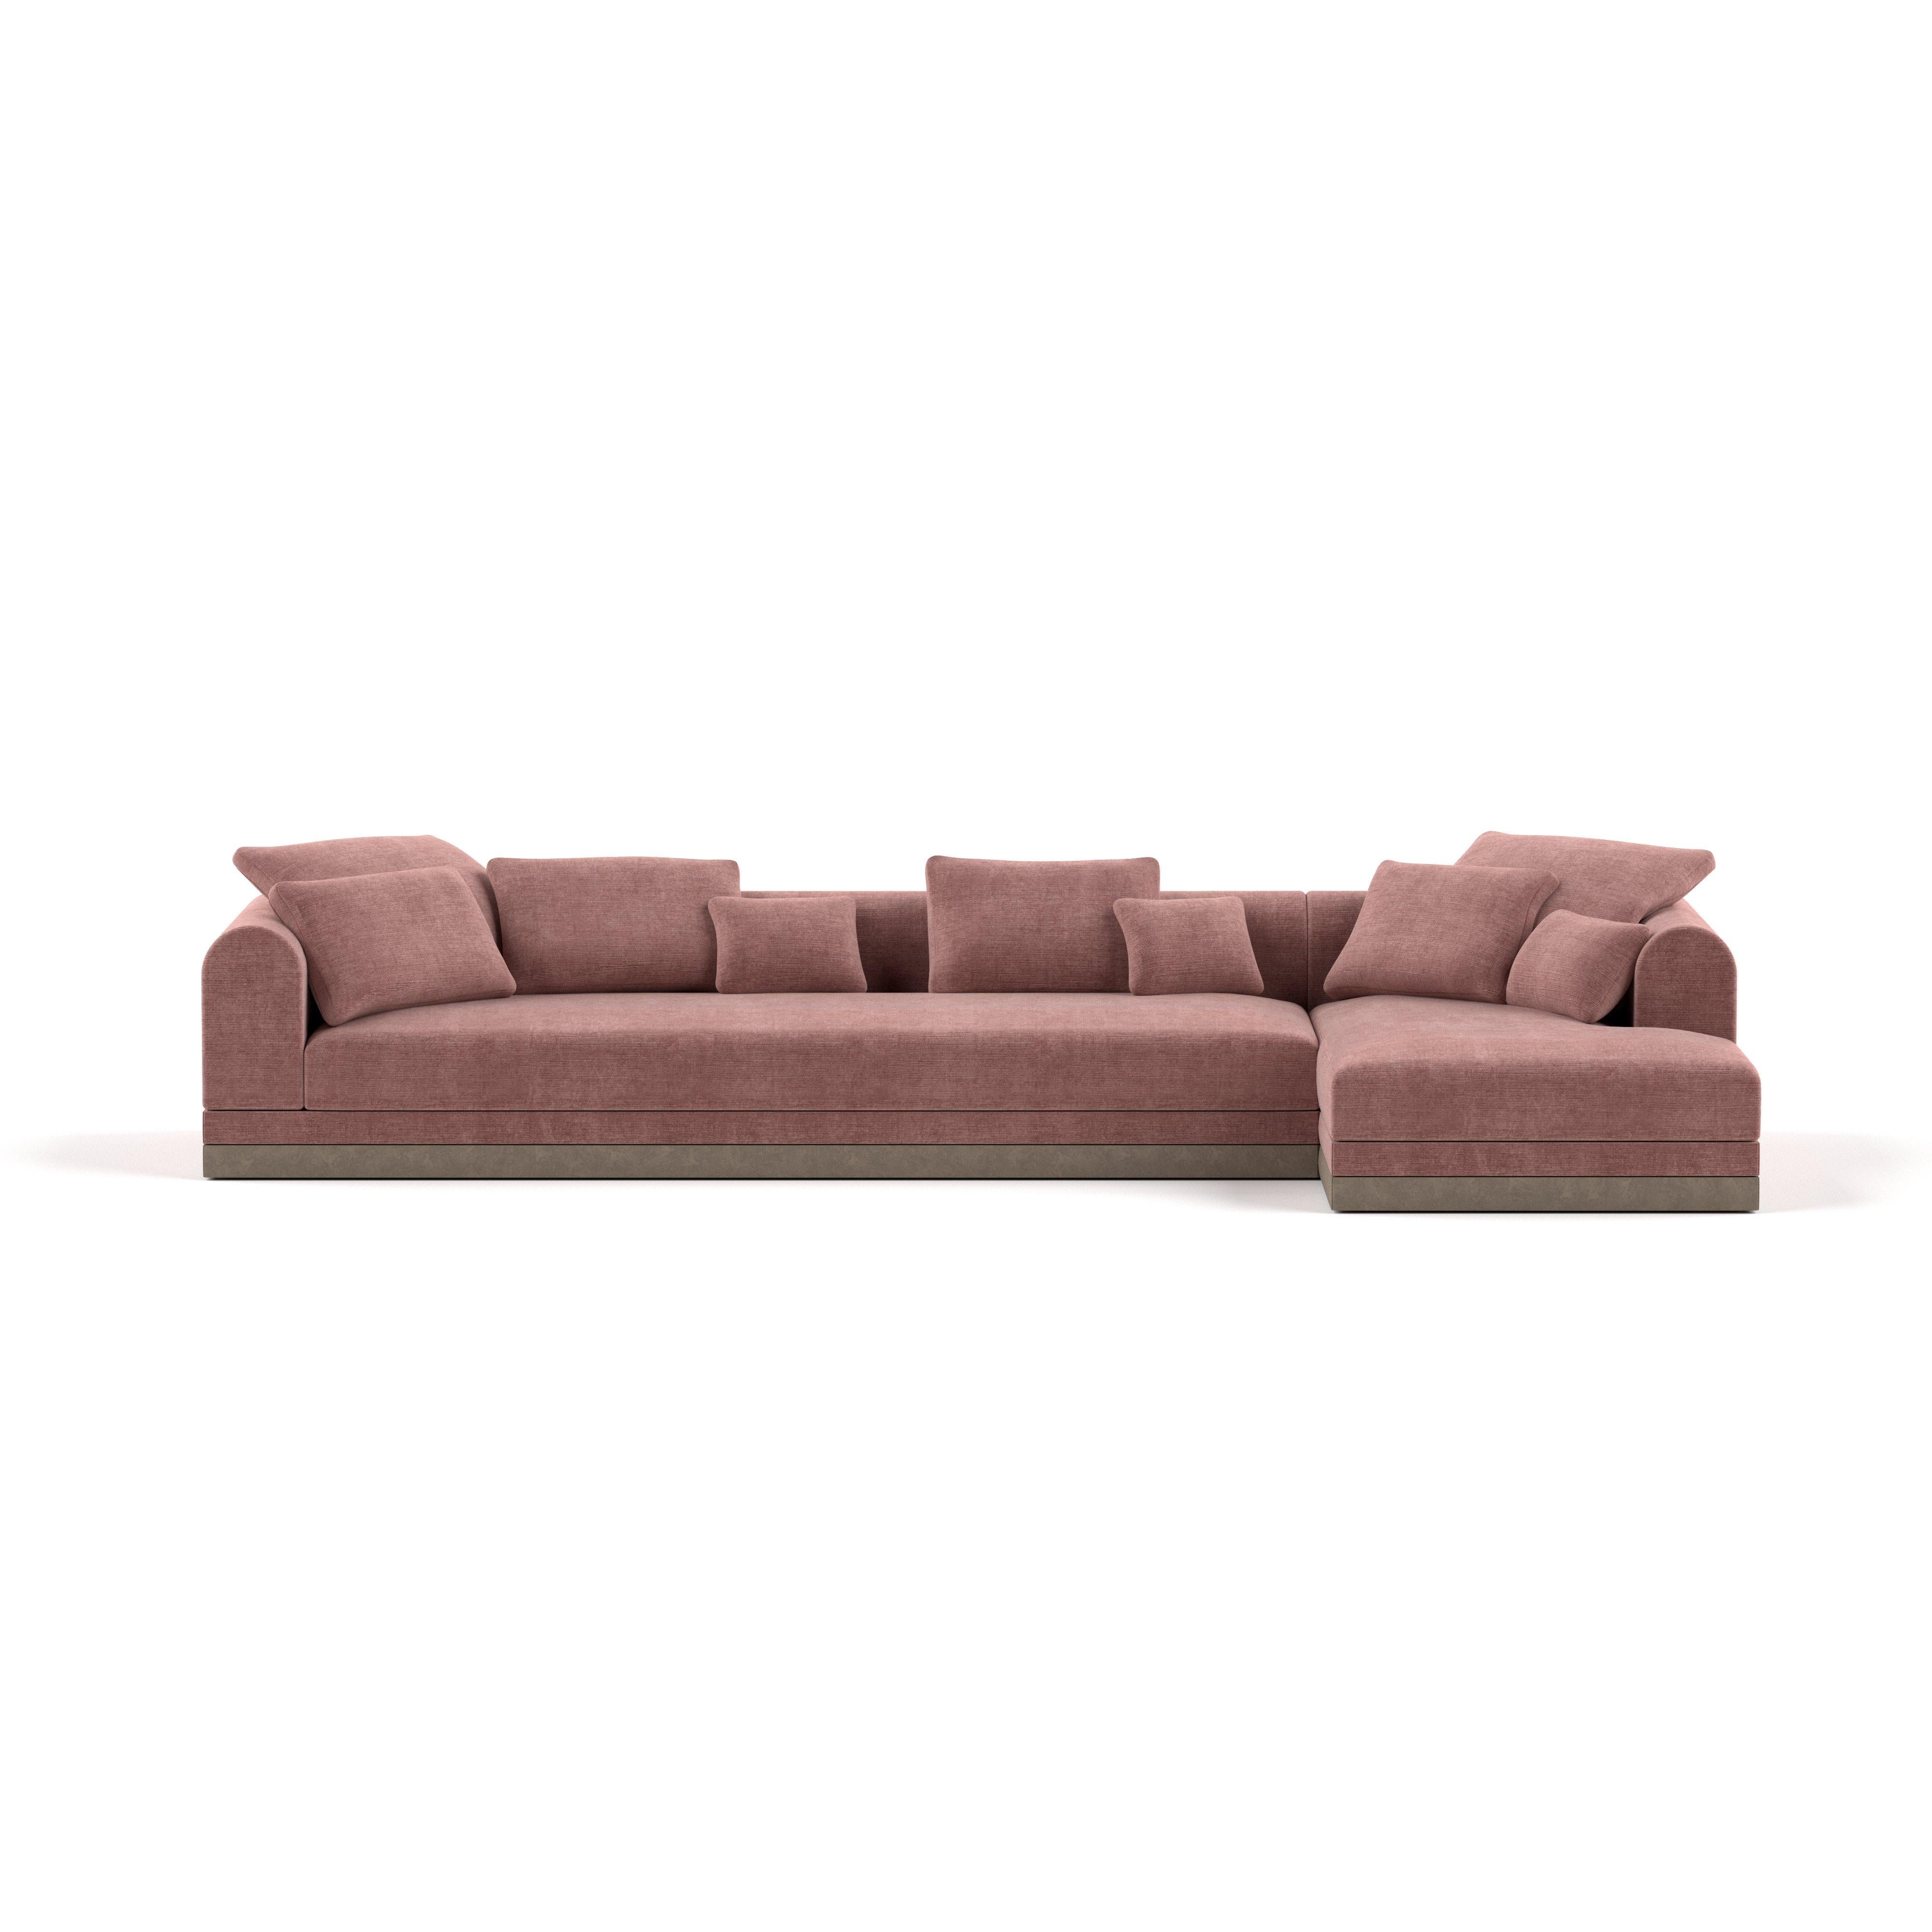 'Aqueduct' Contemporary Sofa by Poiat, Setup 2, Yang 95, Low Plinth For Sale 5